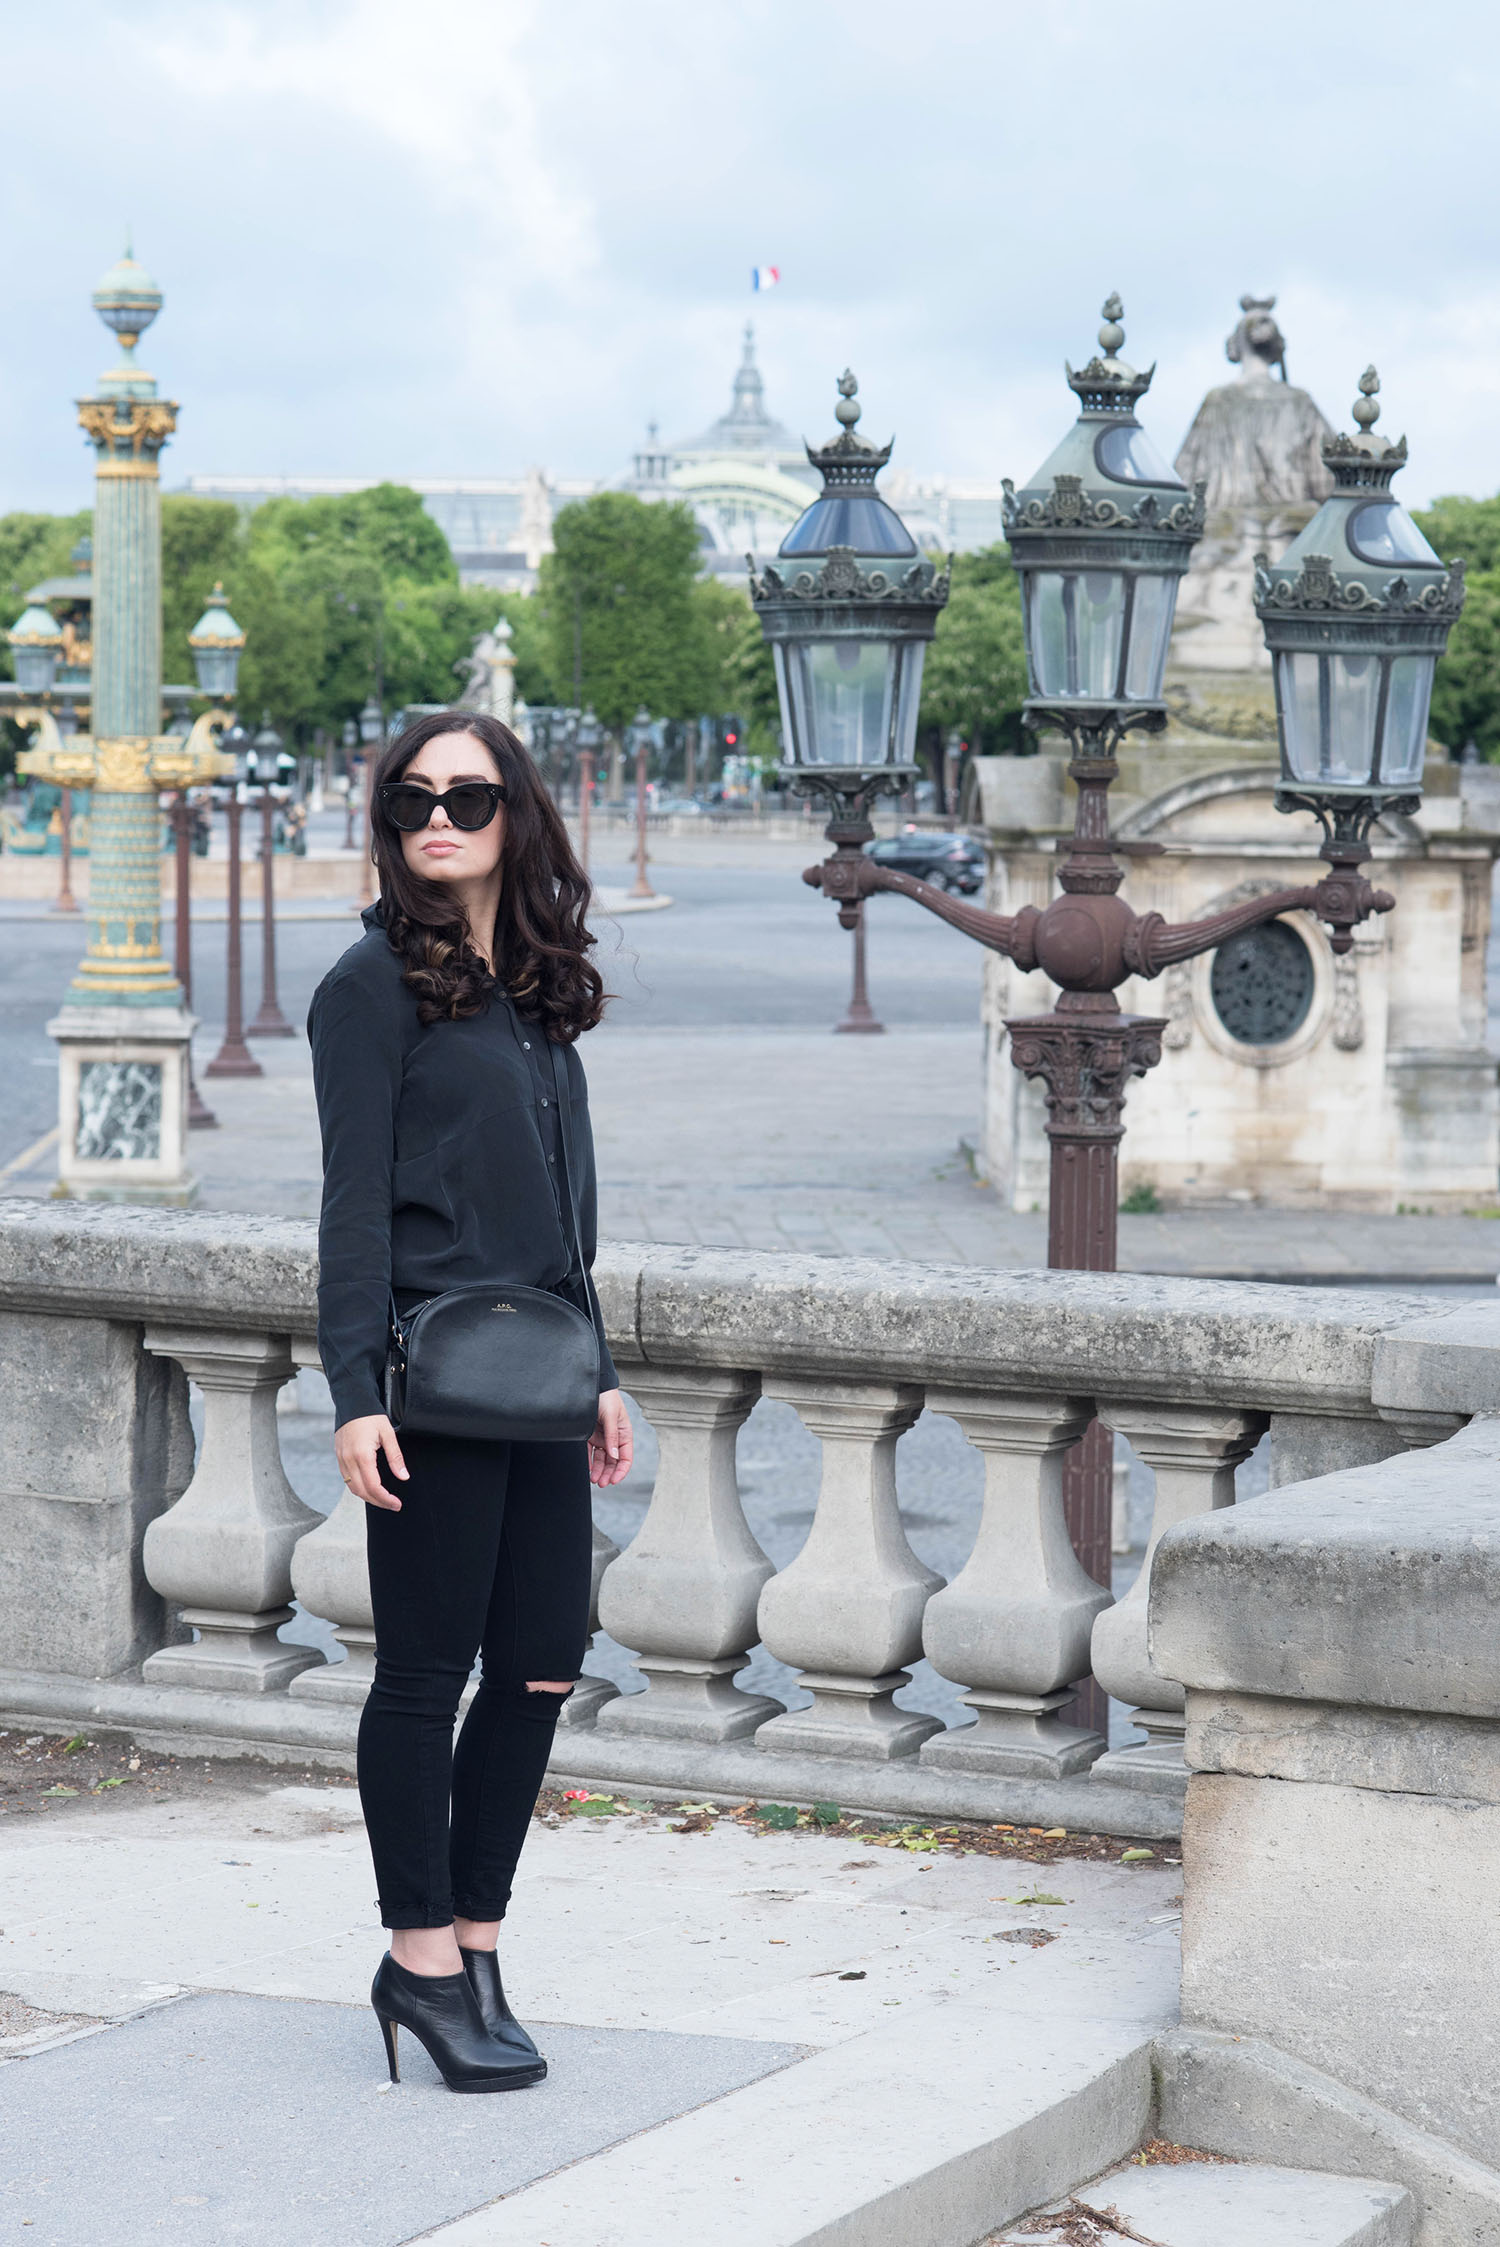 Fashion blogger Cee Fardoe of Coco & Vera stands at Place de la Concorde in Paris wearing an Everlane silk blouse and carrying an APF halfmoon bag